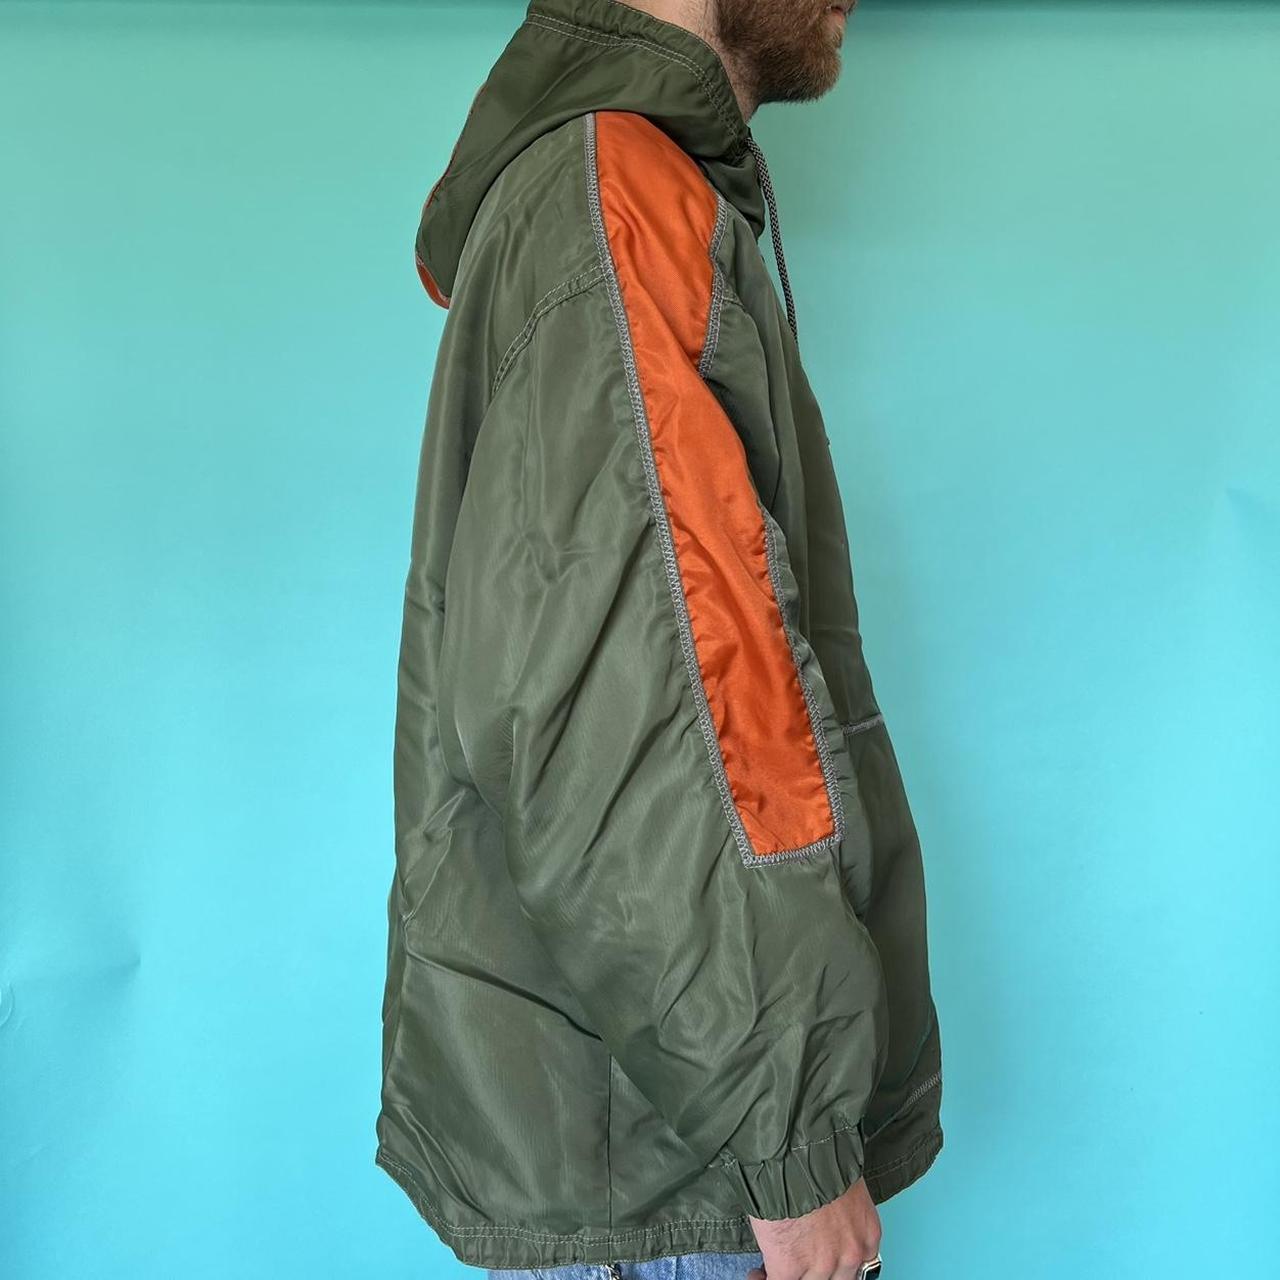 Product Image 2 - Vintage Union Bay green hoodie